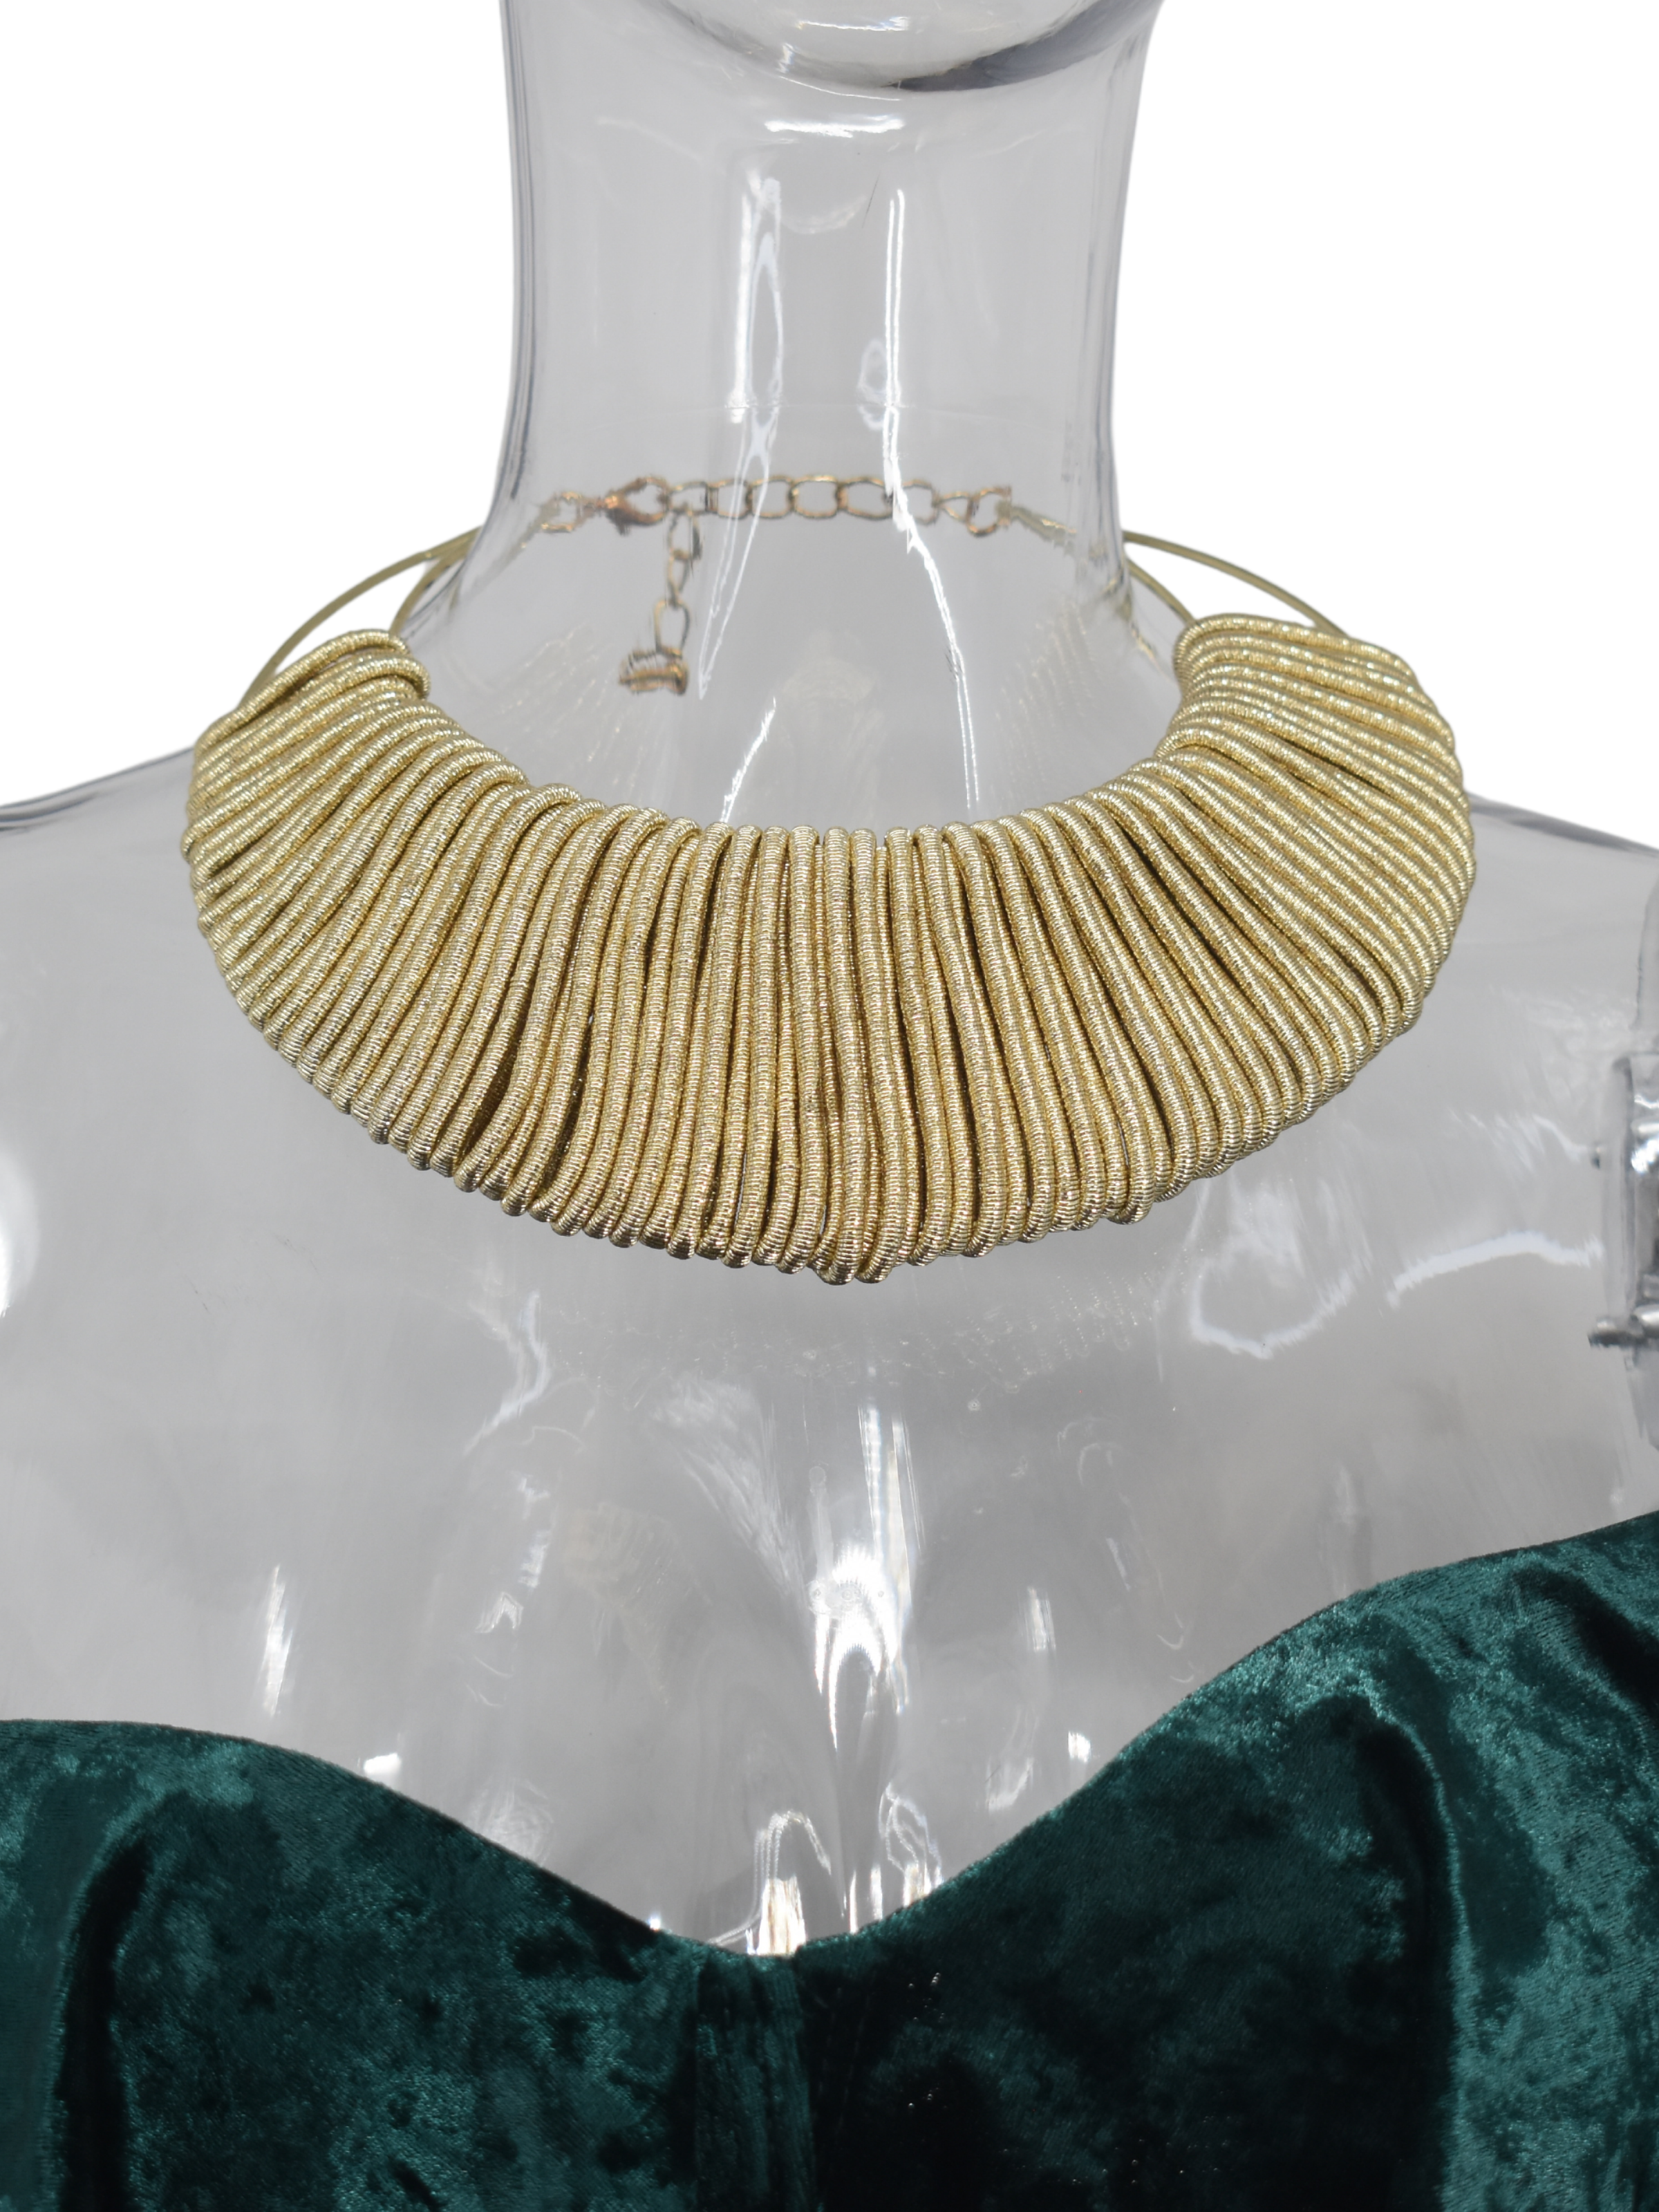 Distinctively cute our Hazel choker bib style Necklace will win them over every time. This Bib style necklace has gold tone and is wrapped in gold glitzy rope to form a beautiful design.